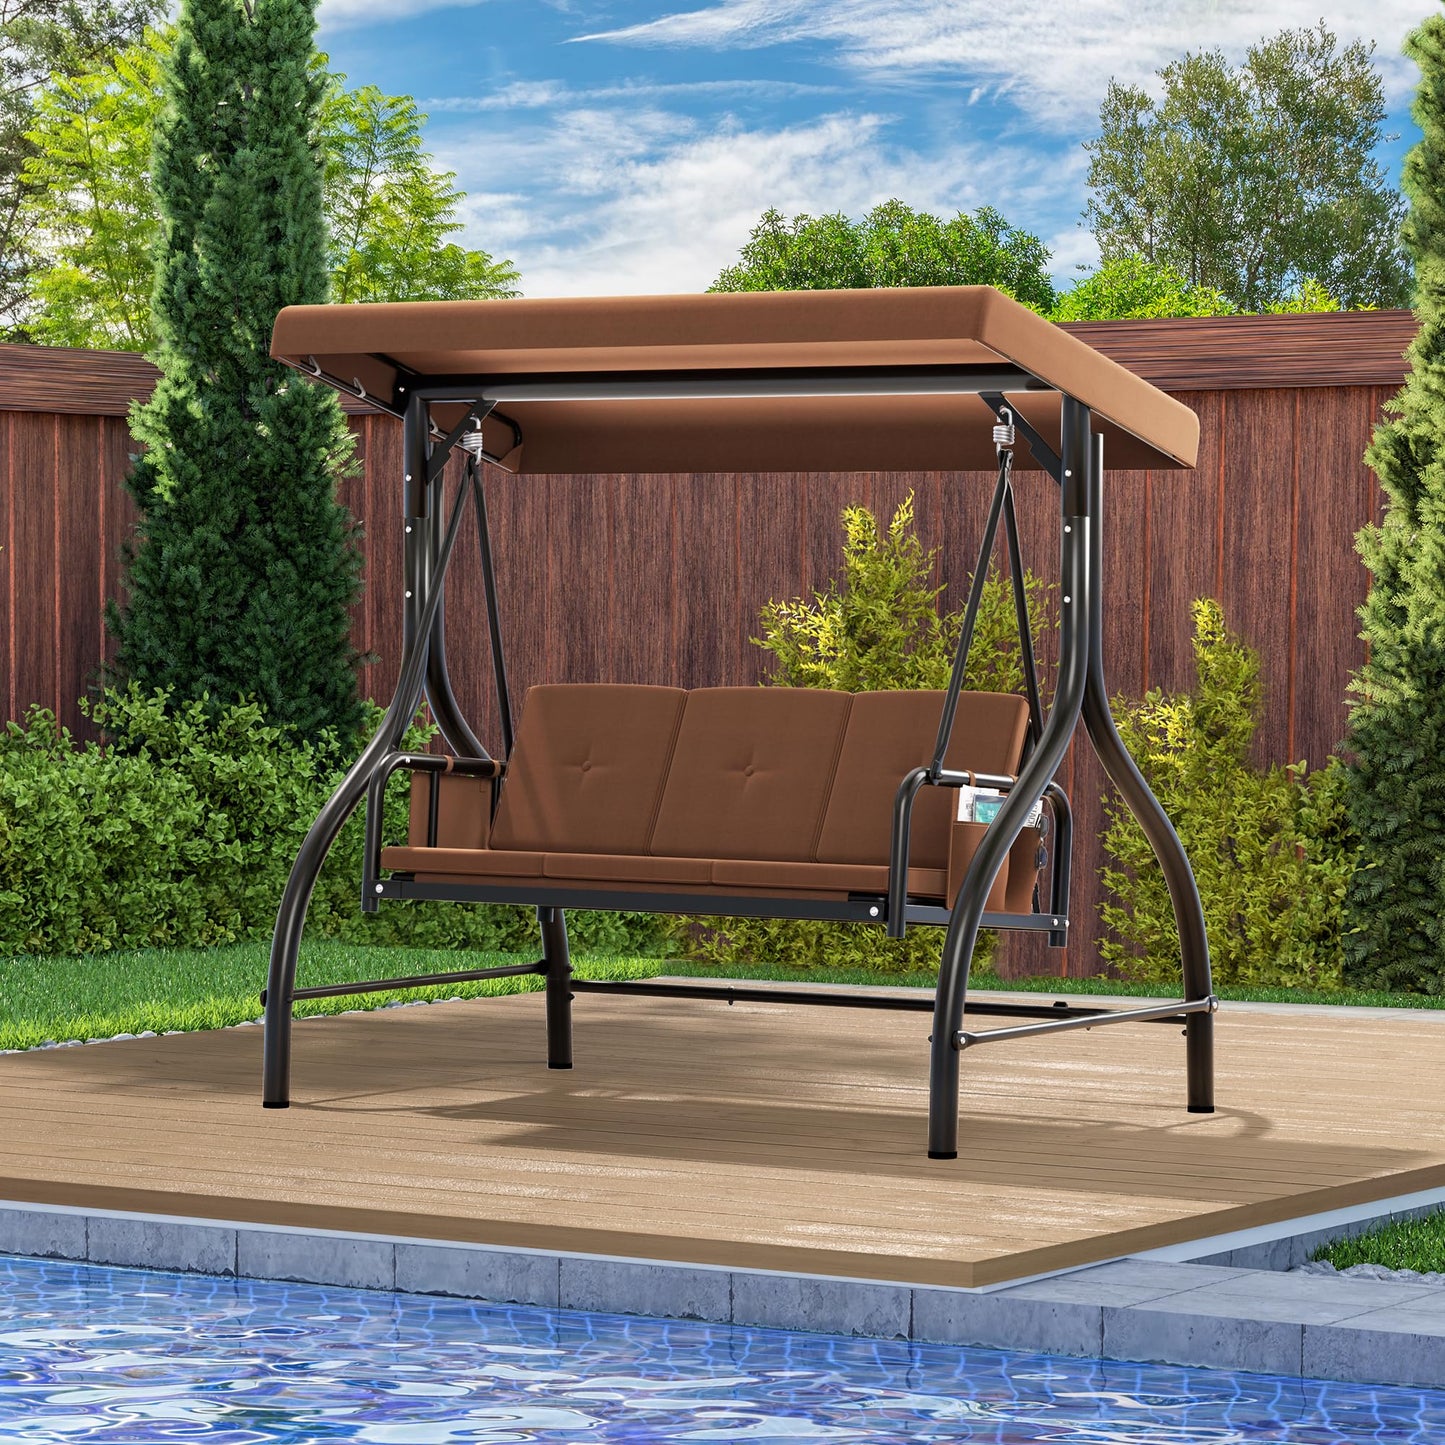 YITAHOME Porch Swing Bed 3-Seats Outdoor Patio Swing Heavy Duty Swing Chair with Adjustable Canopy Removable Cushion, Suitable for Adult in Garden, Poolside, Balcony, Brown